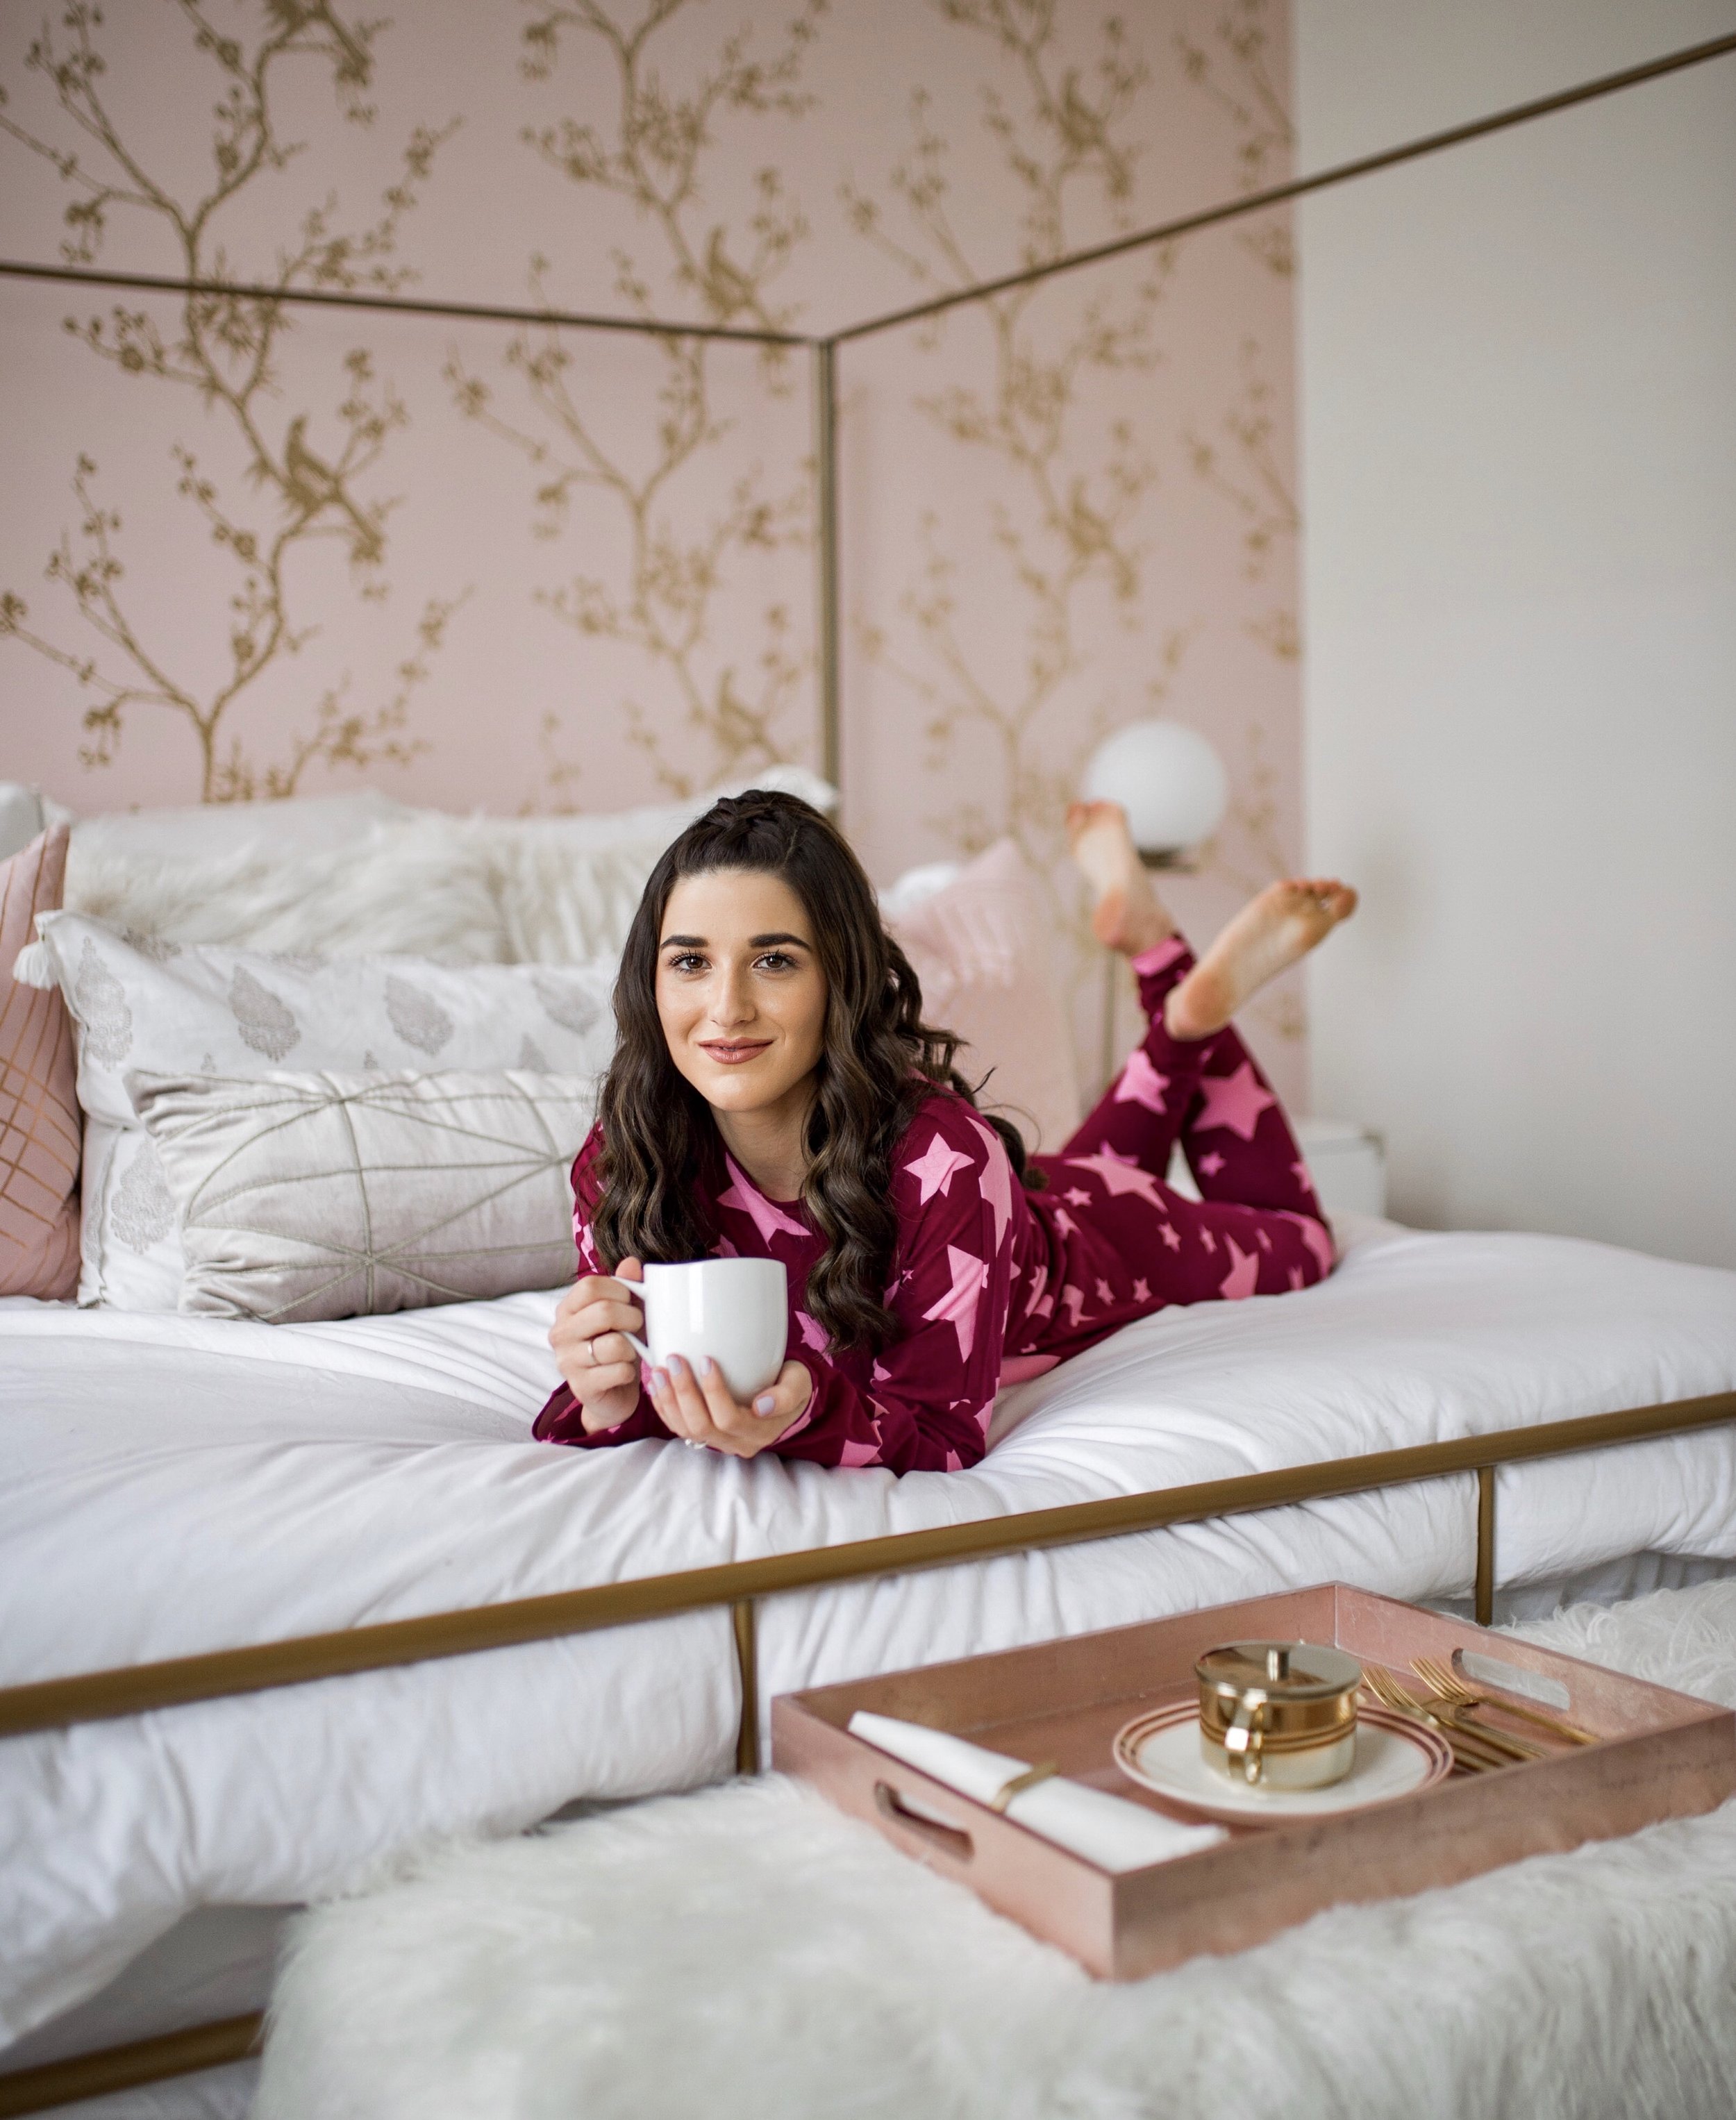 How I Became A Full Time Blogger Pink Star Pajamas Esther Santer Fashion Blog NYC Street Style Blogger Outfit  OOTD Trendy Shopping ASOS Shopping Cute Pretty Hairstyle Laurel Creative New York City Penthouse Photoshoot Bedroom Wayfair Furniture Modern.jpg